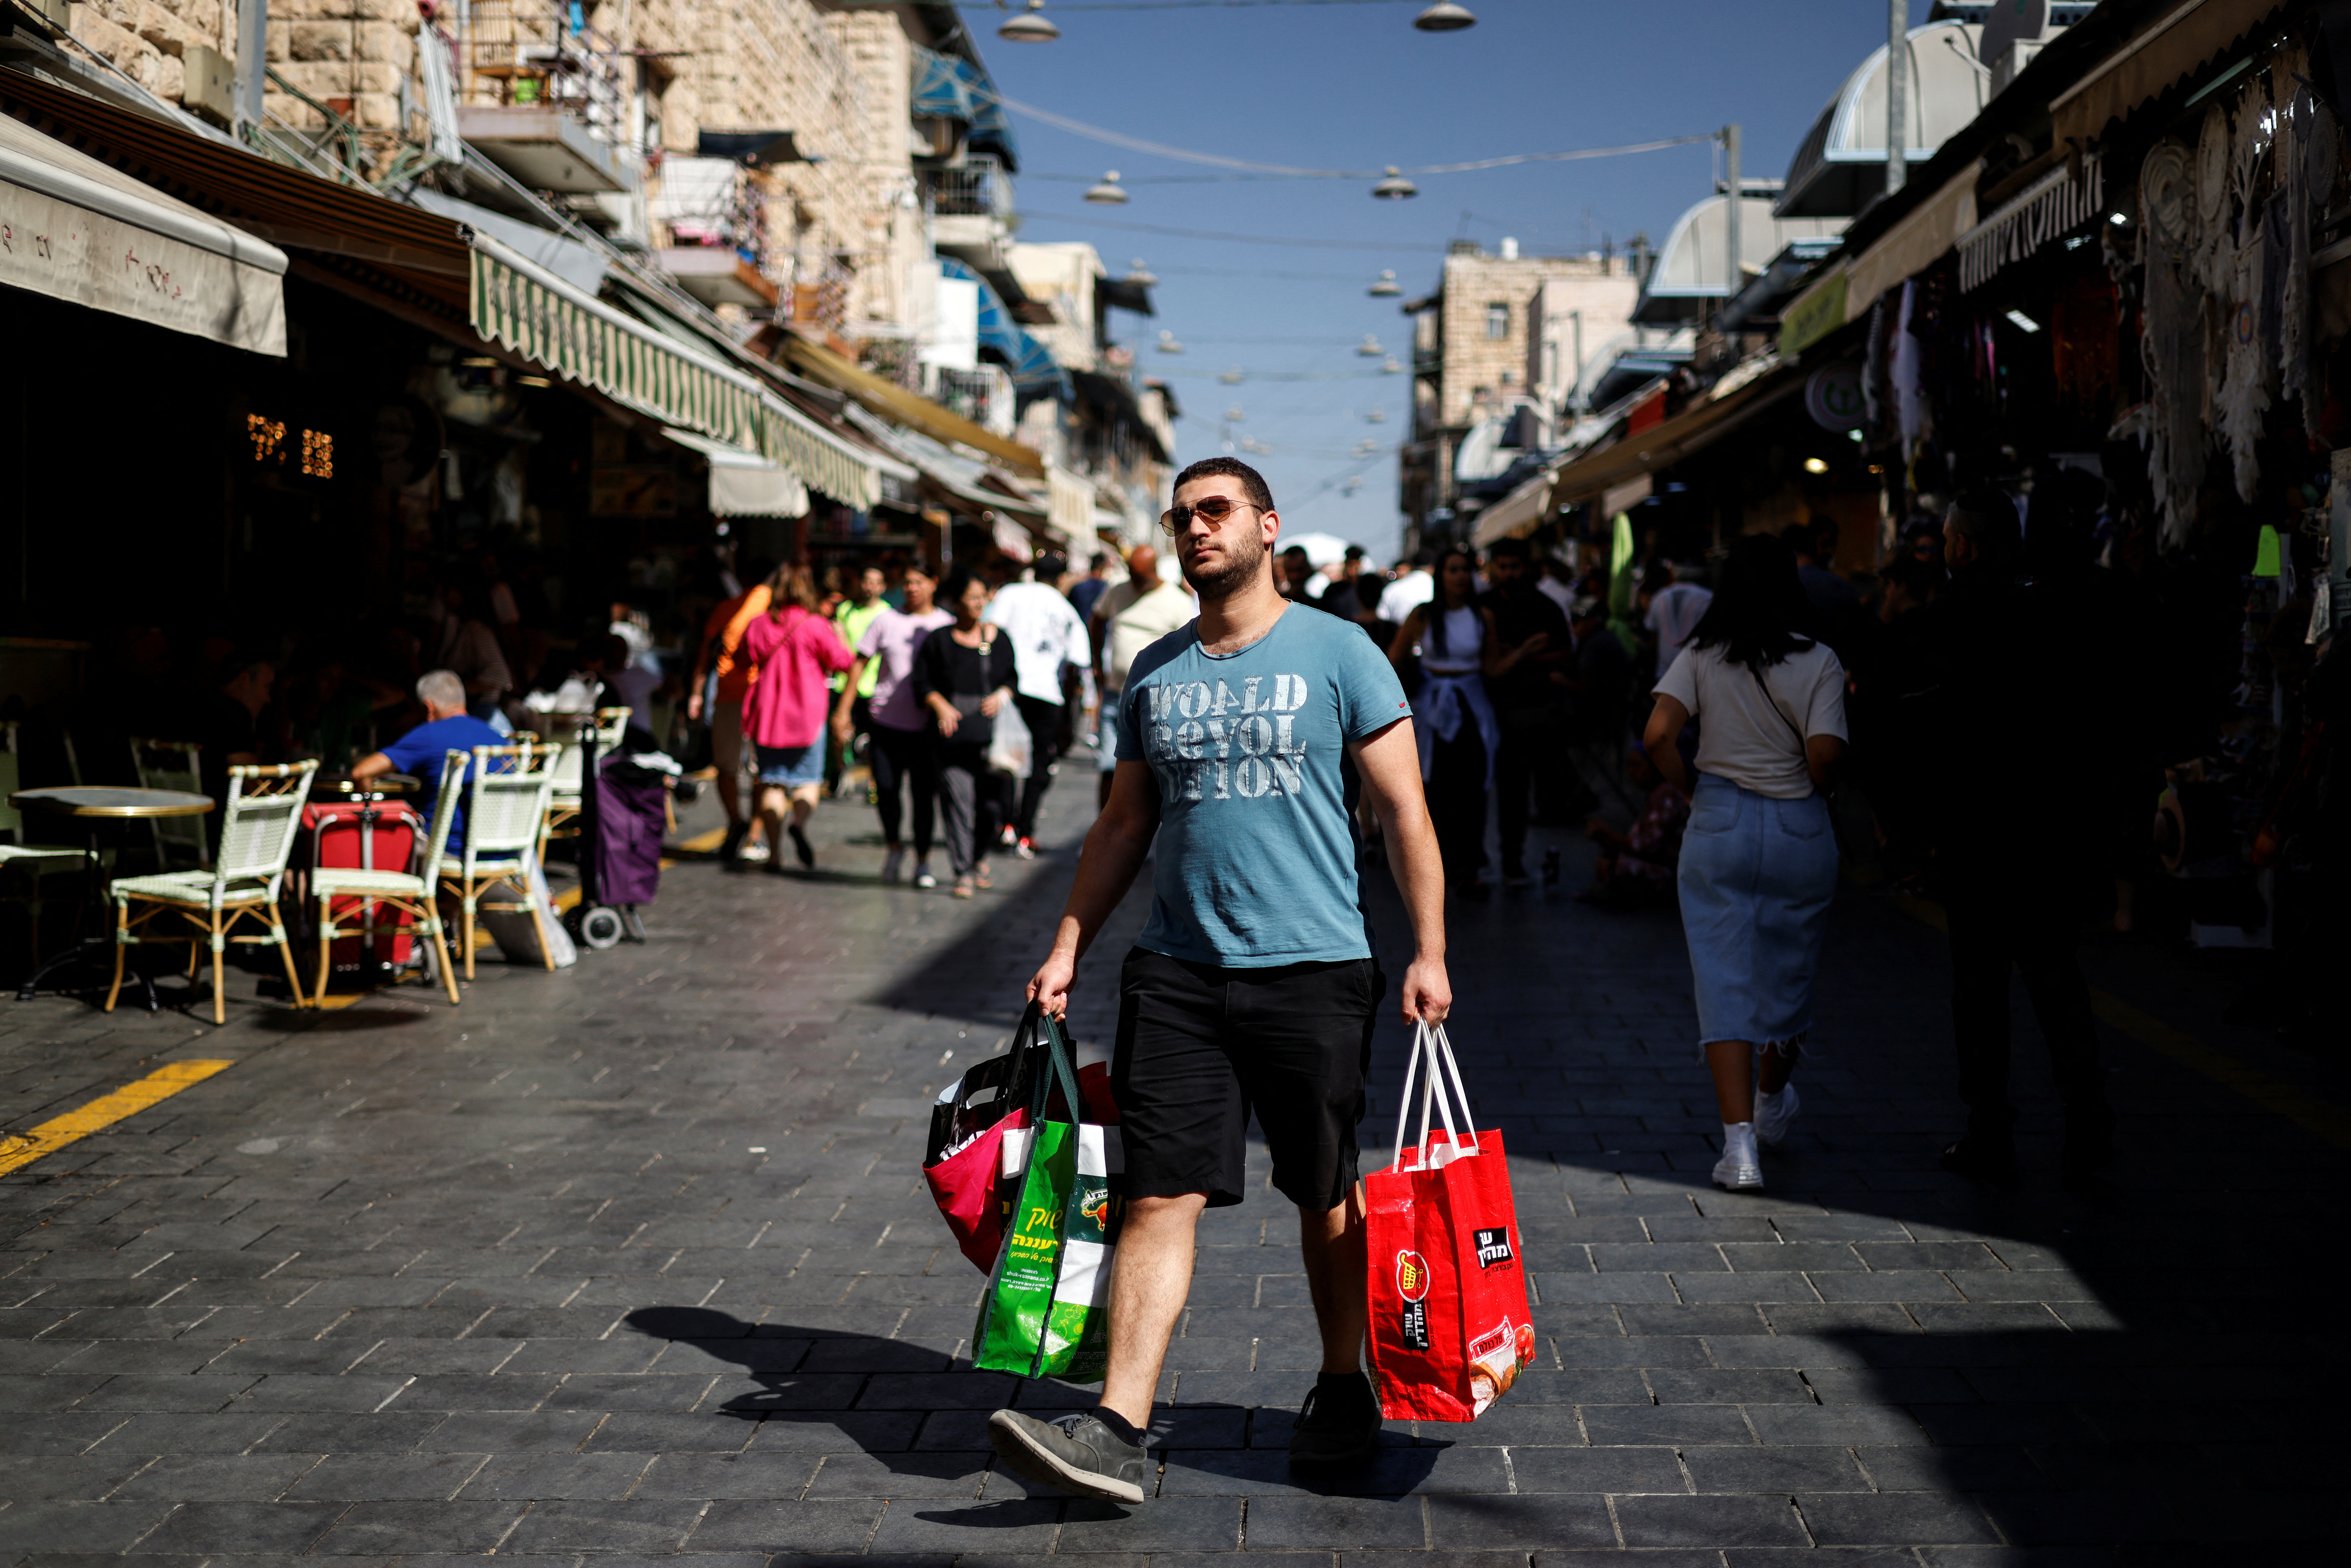 Shoppers carry their groceries through Mahane Yehuda market in Jerusalem